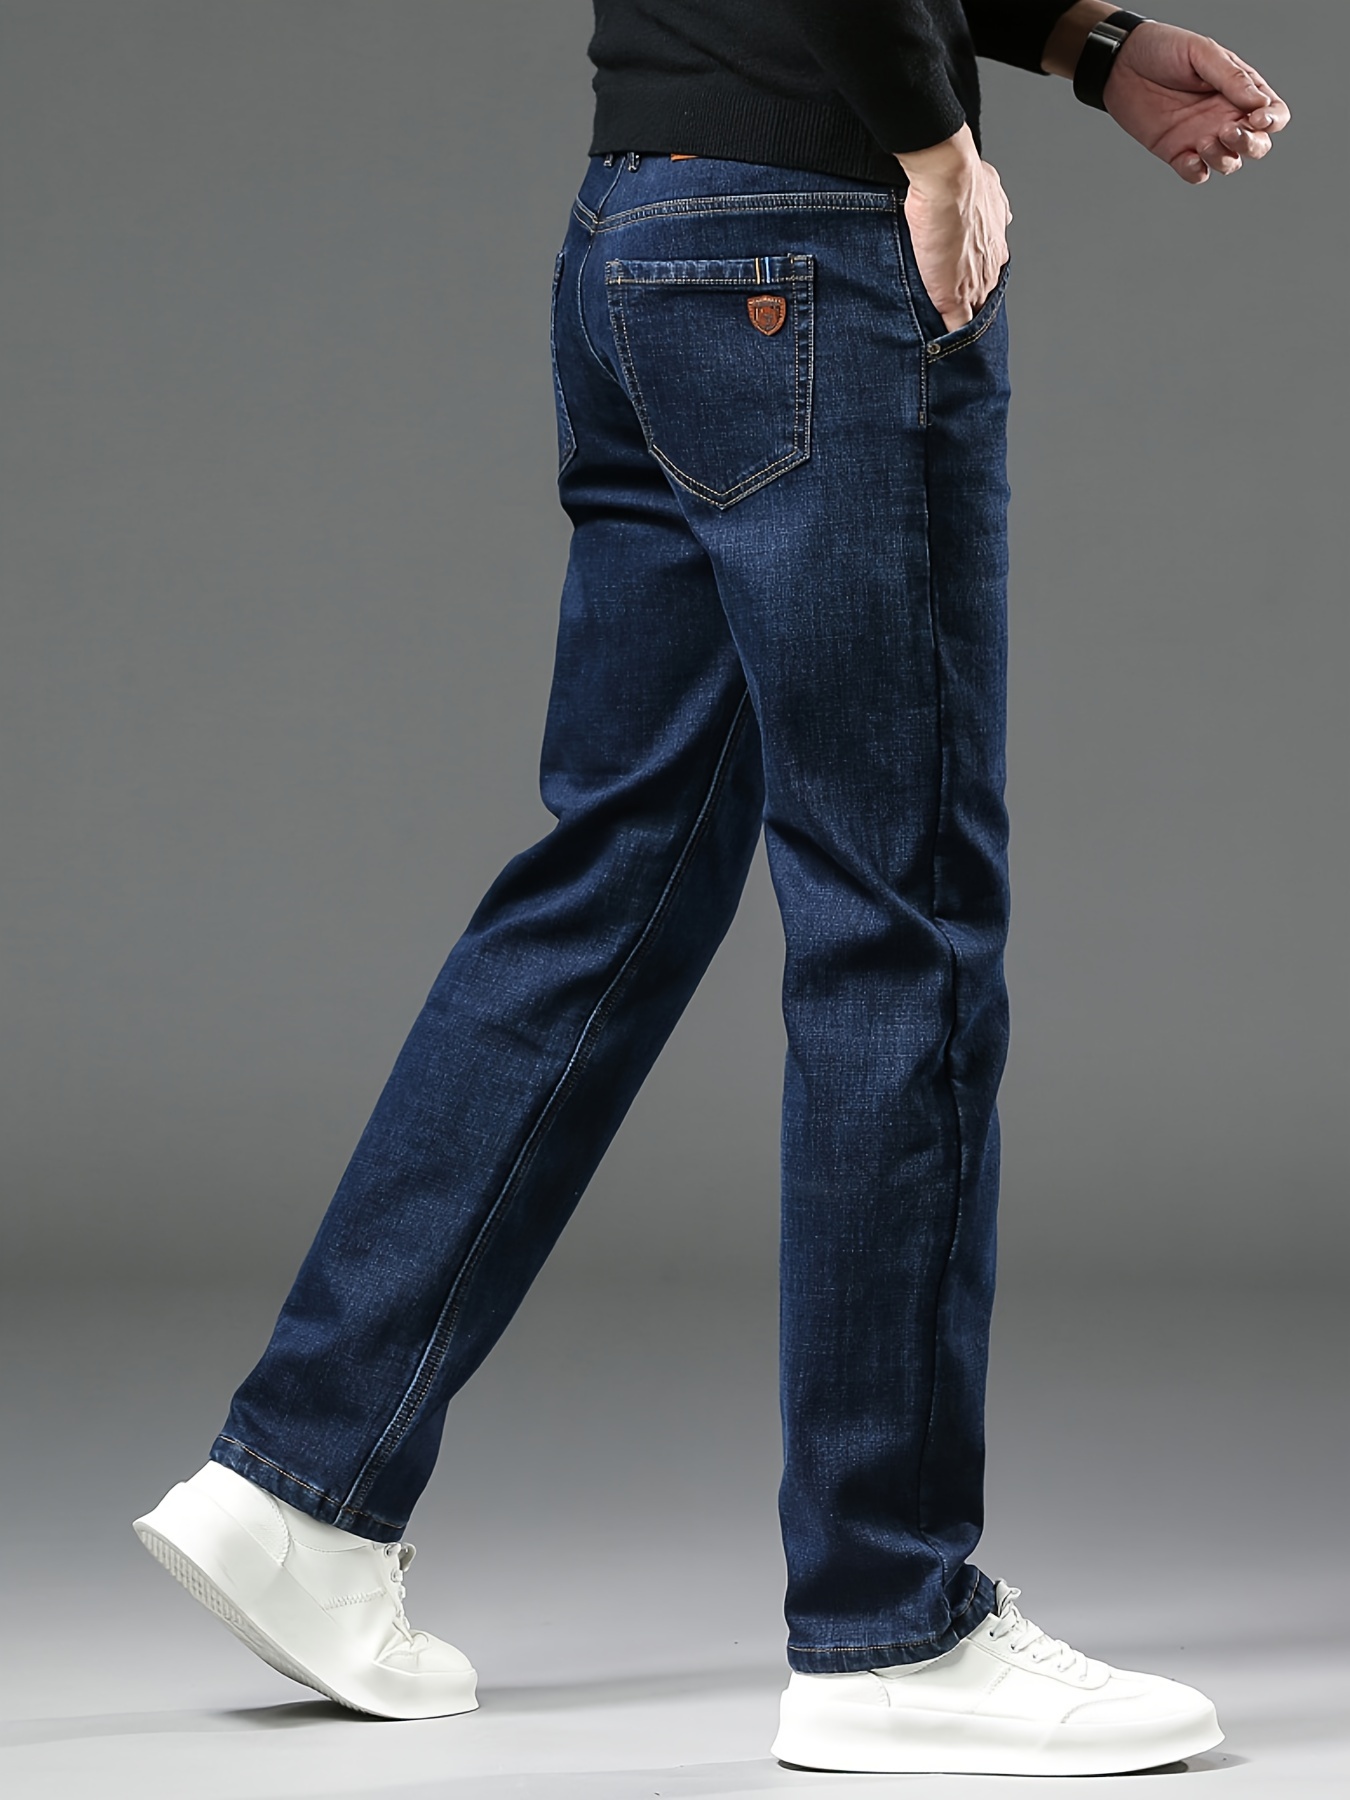 cotton blend mens solid slim fit denim jeans with pockets all seasons outdoor leisure work